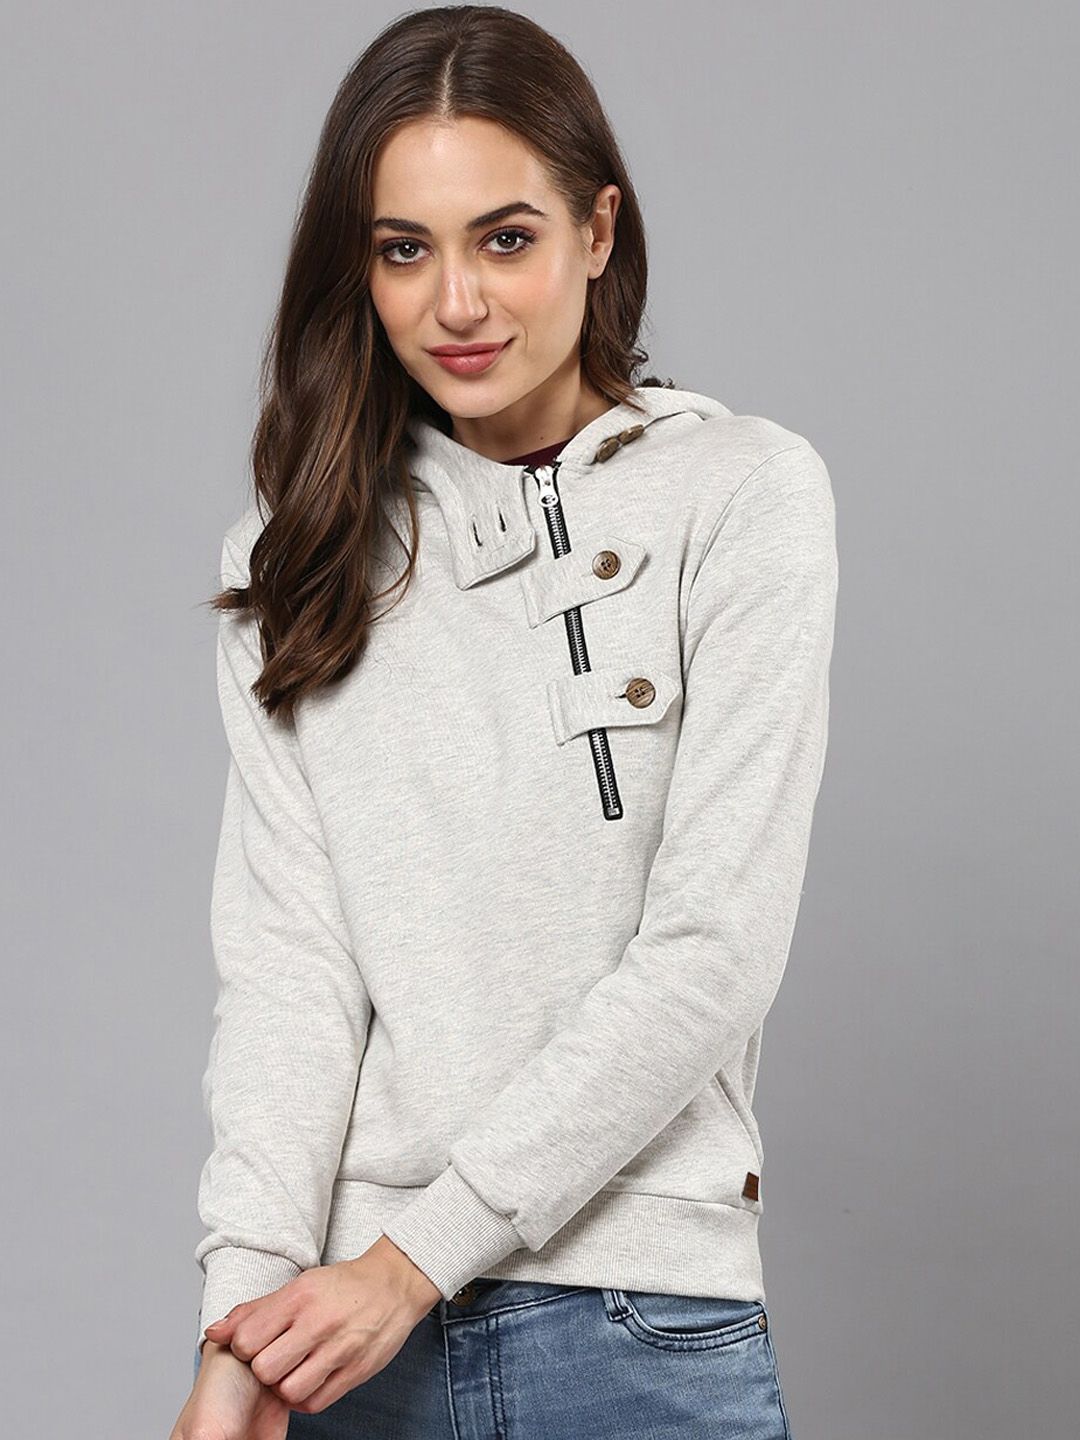 Campus Sutra Women Cream-Coloured Washed Windcheater Sporty Jacket Price in India